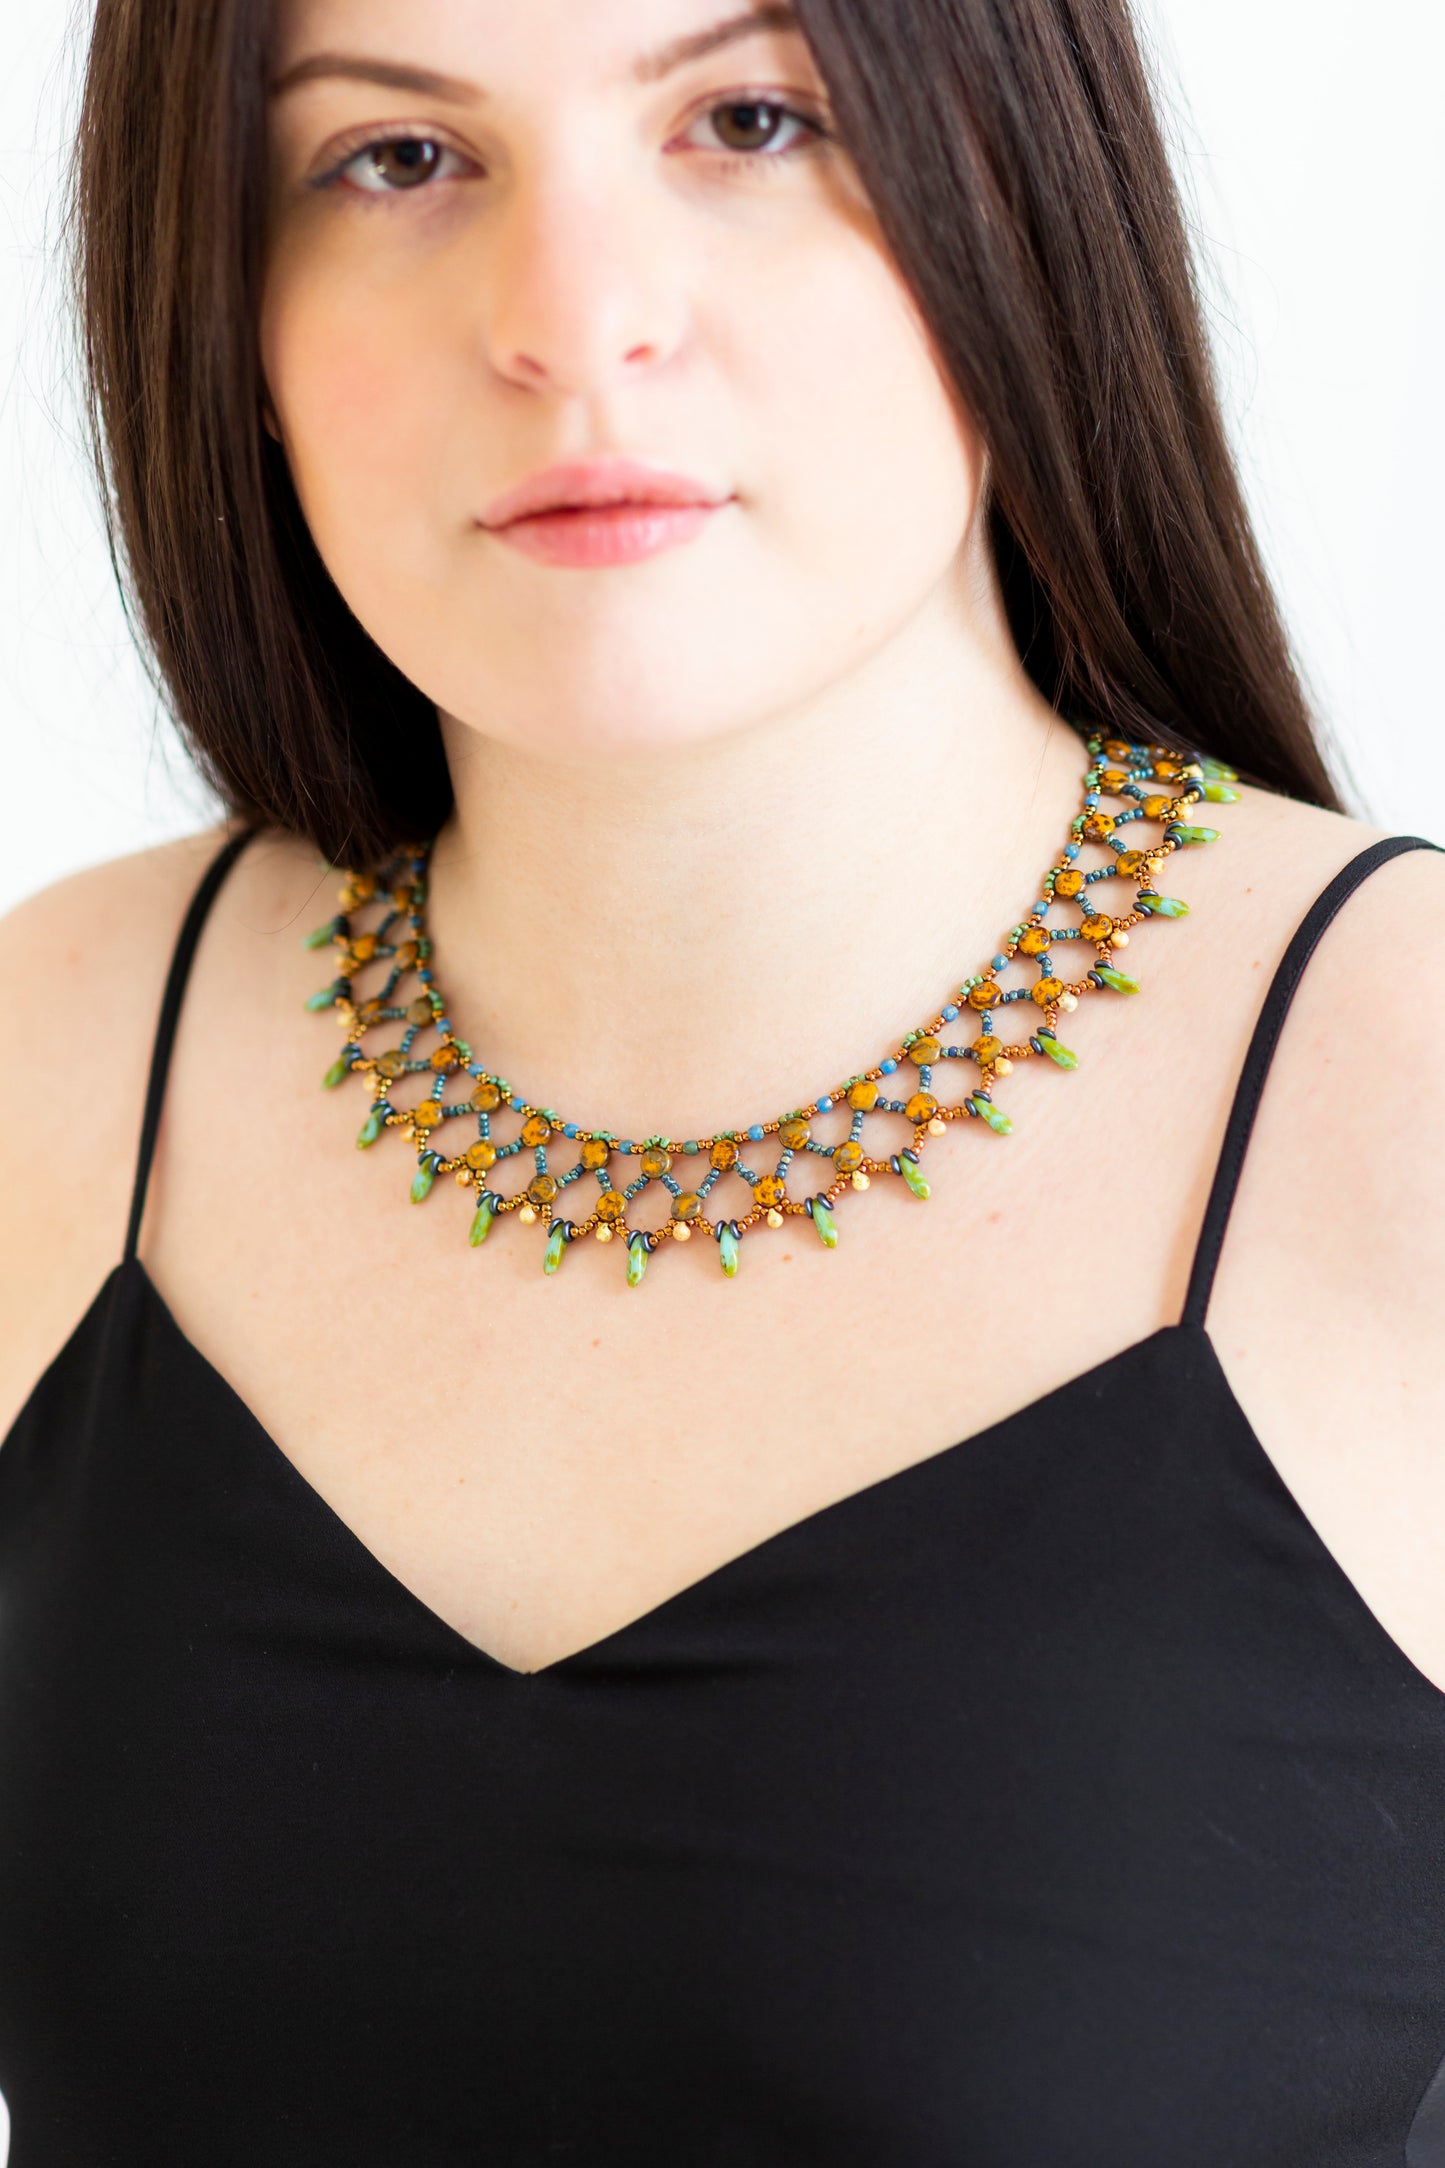 Egyptian Style Net Collar | Shades of Purple Necklace